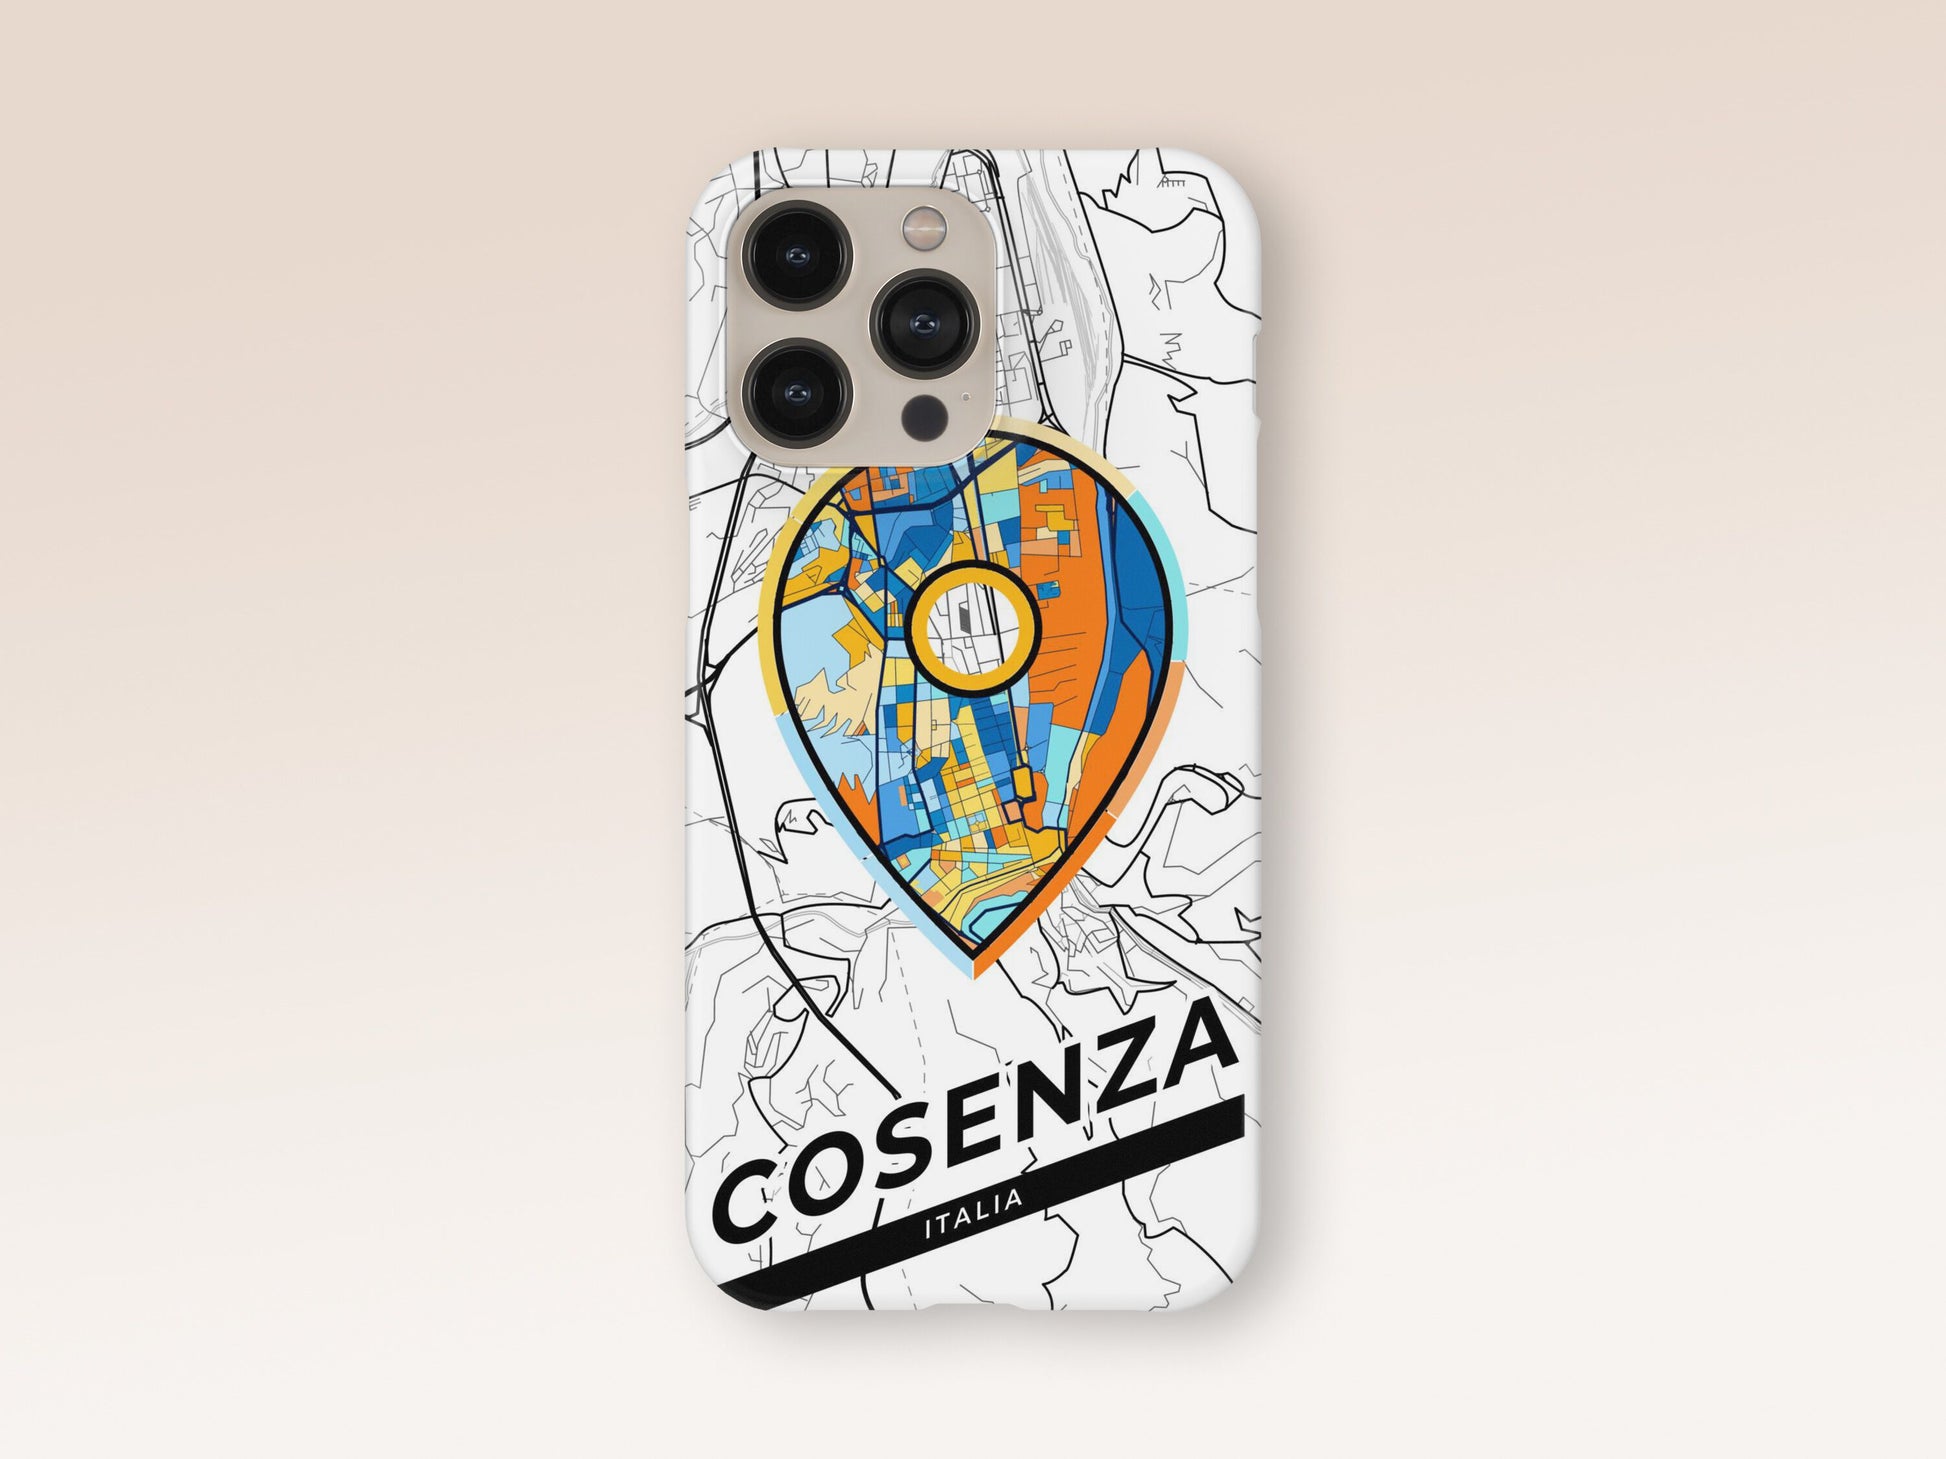 Cosenza Italy slim phone case with colorful icon. Birthday, wedding or housewarming gift. Couple match cases. 1